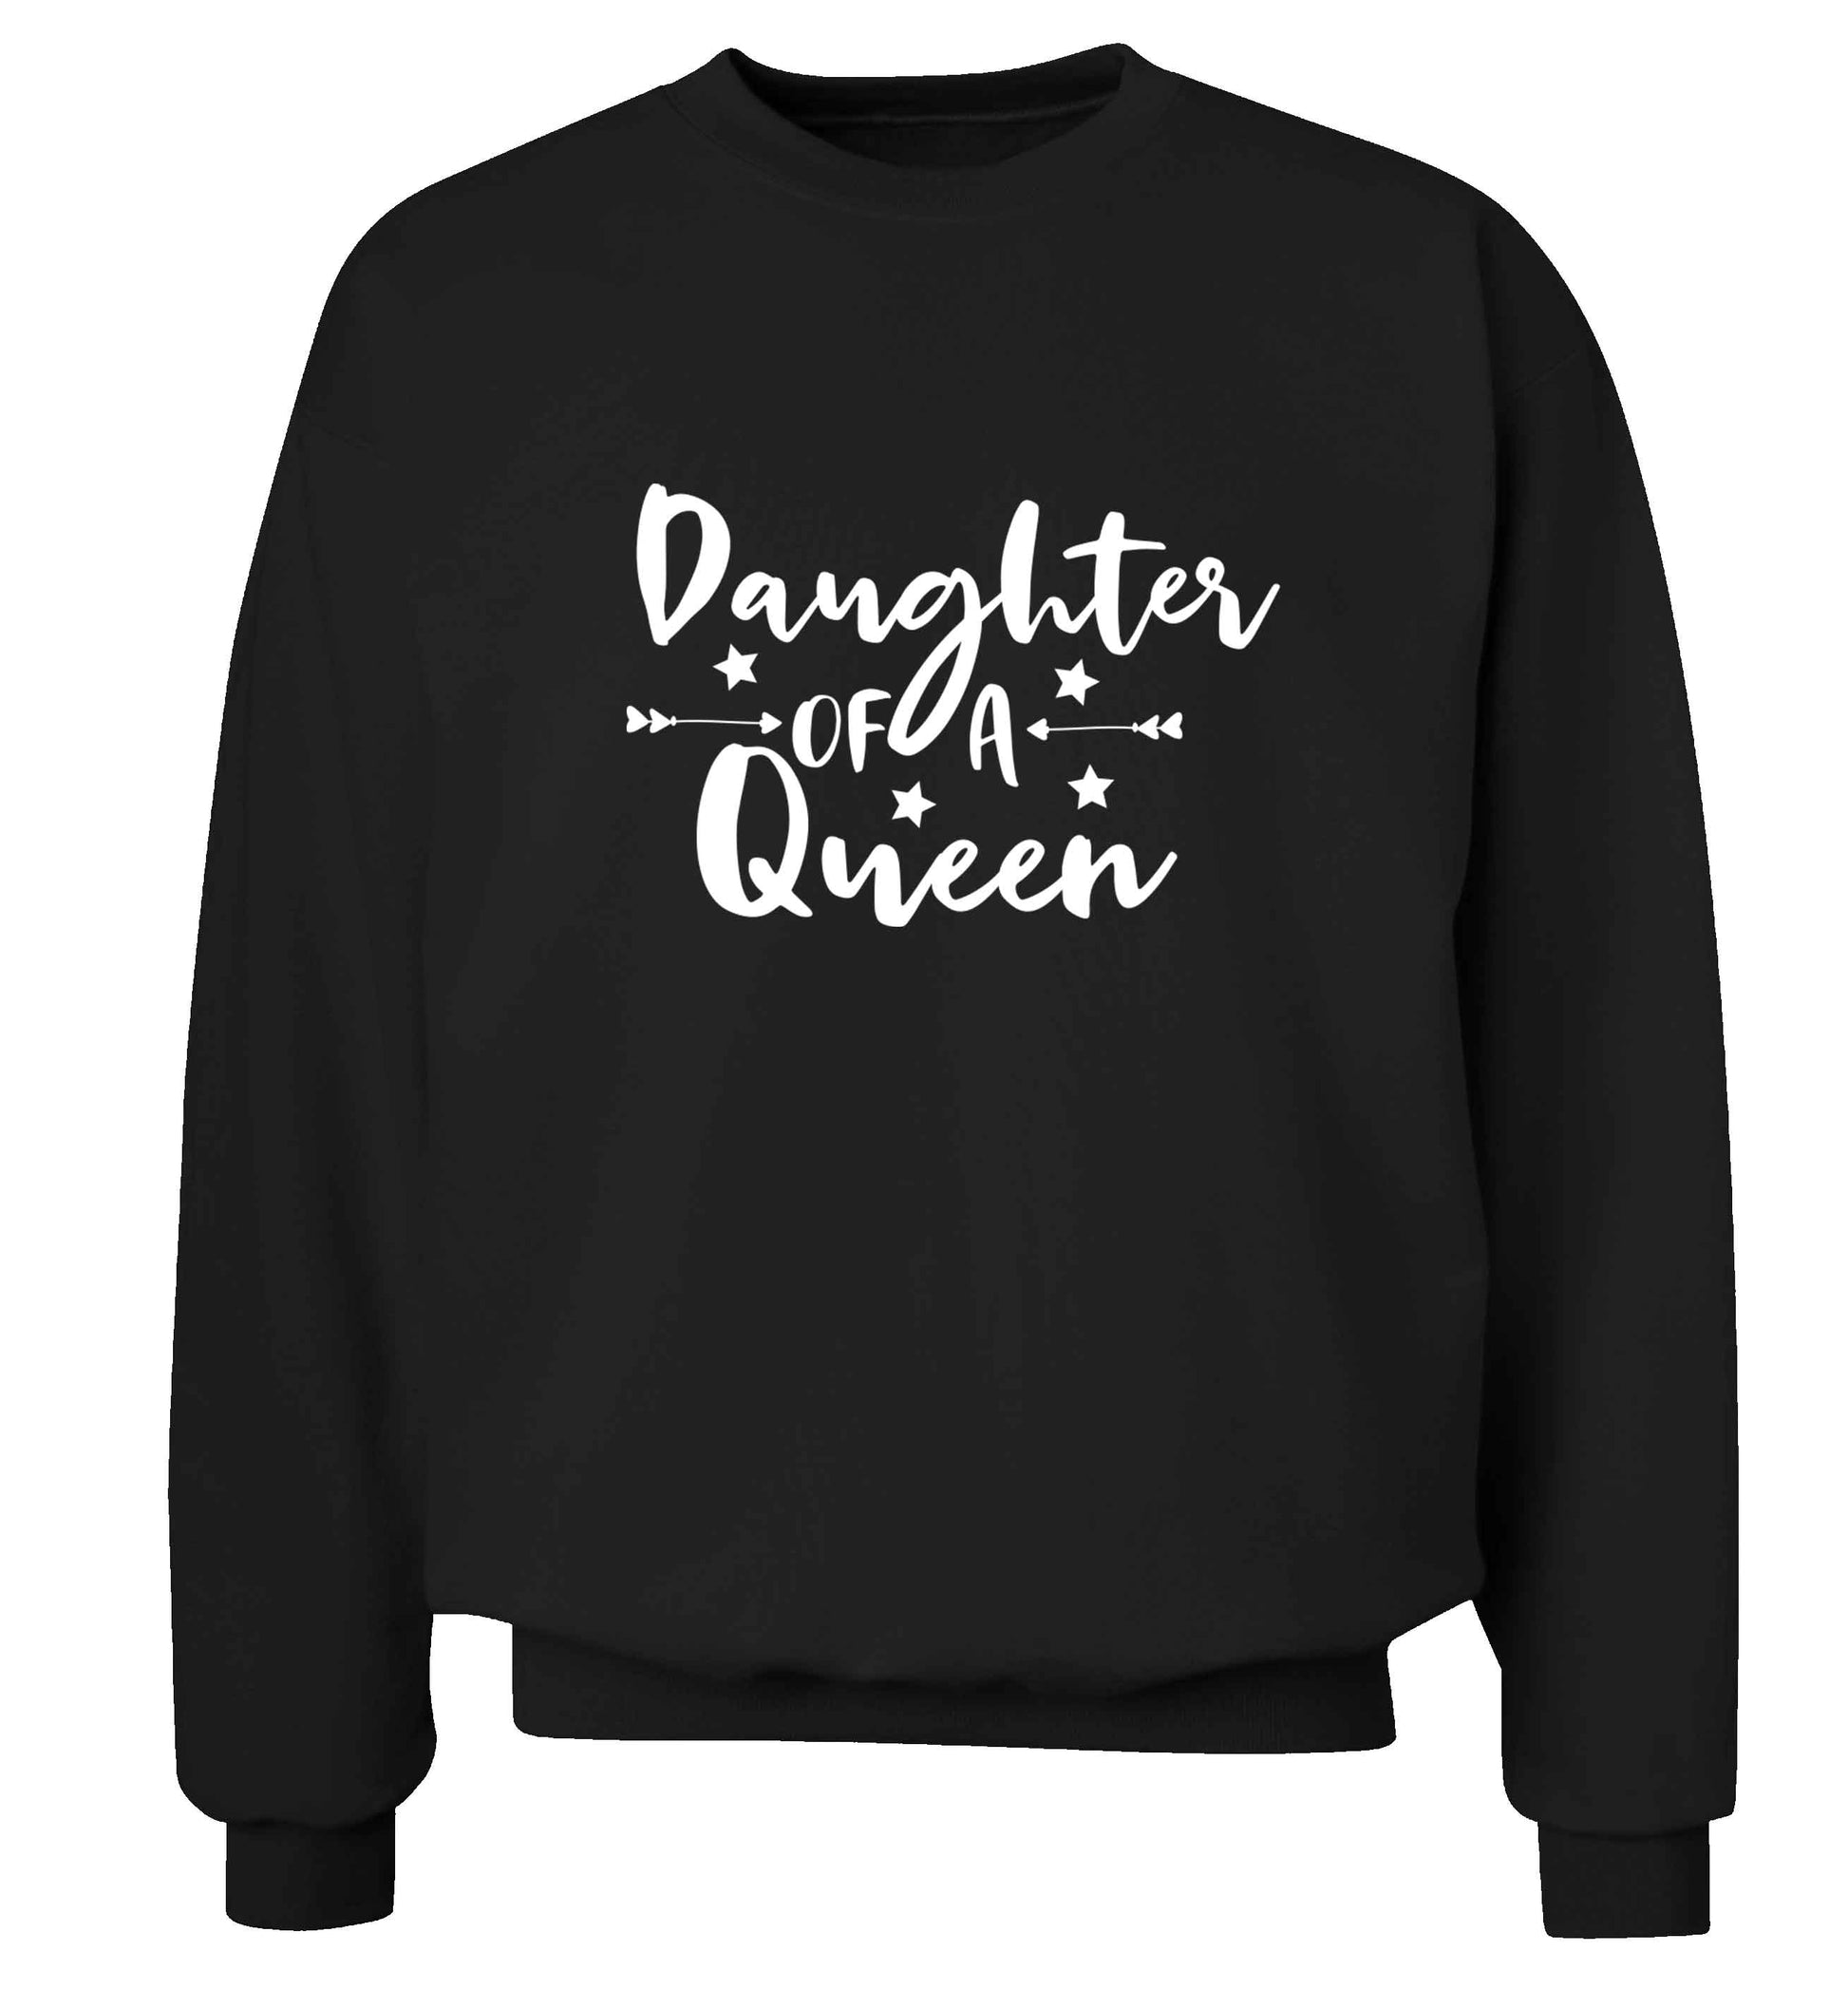 Daughter of a Queen adult's unisex black sweater 2XL